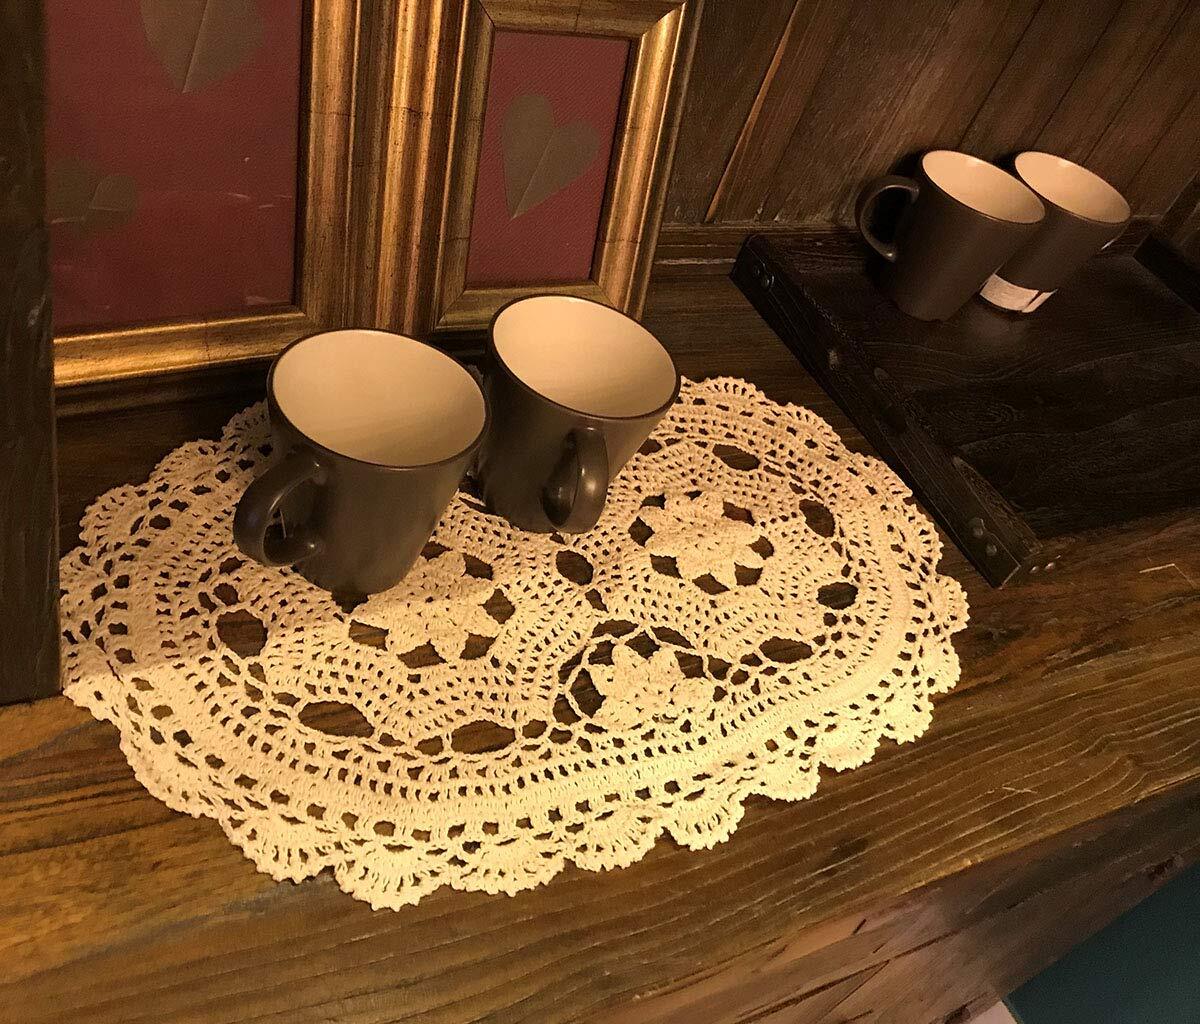 clberni 2 Pieces Beige Handmade Crochet Doilies Cotton Table Runner Lace Doilies Doily Oval Dresser Scarves for bedrooms,12 by 20 INCHES. , 20 x 12